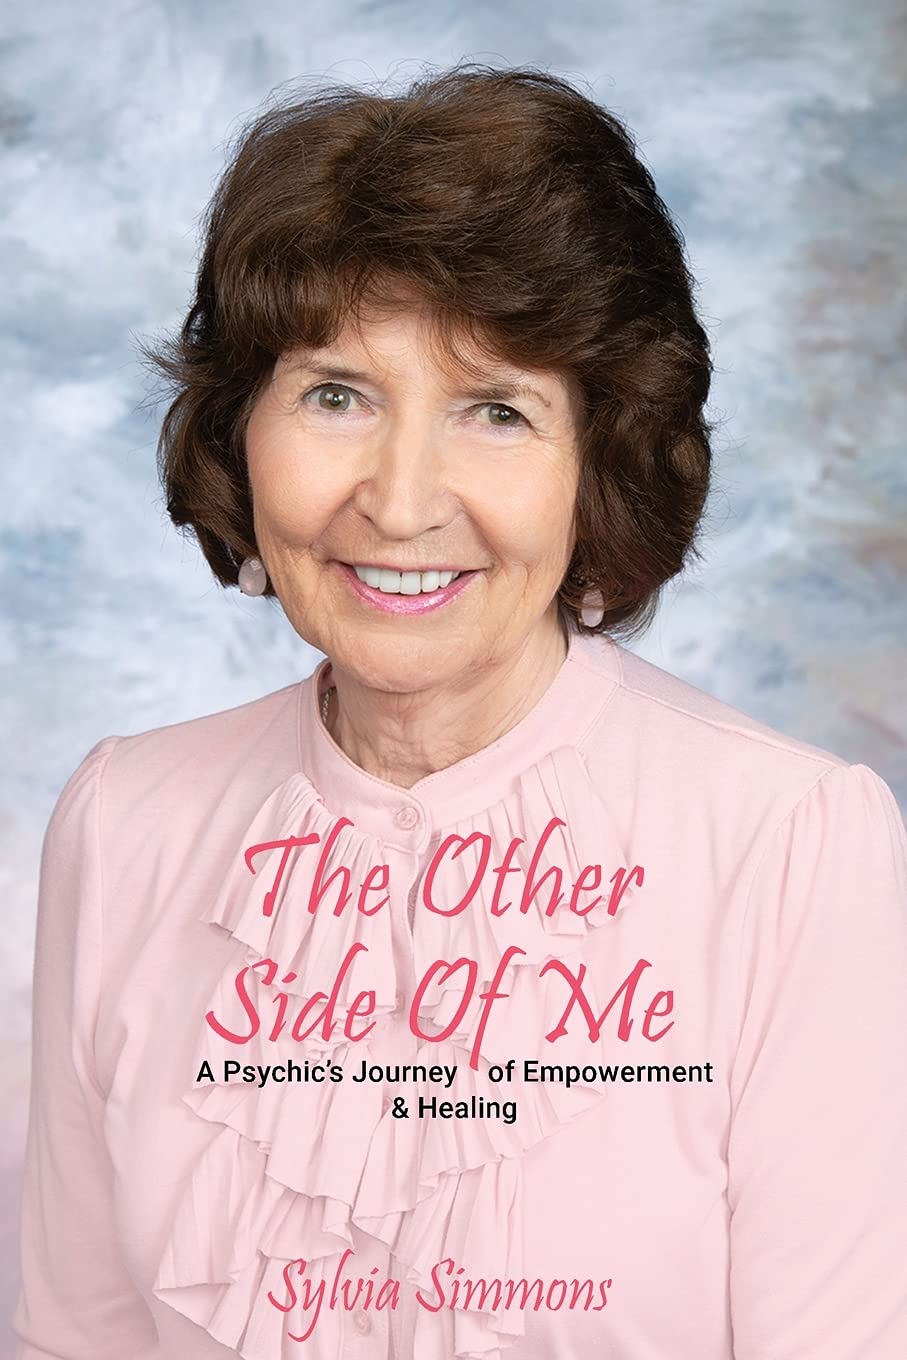 The Other Side Of Me - A Psychic's Journey of Empowerment and Healing by Sylvia Simmons